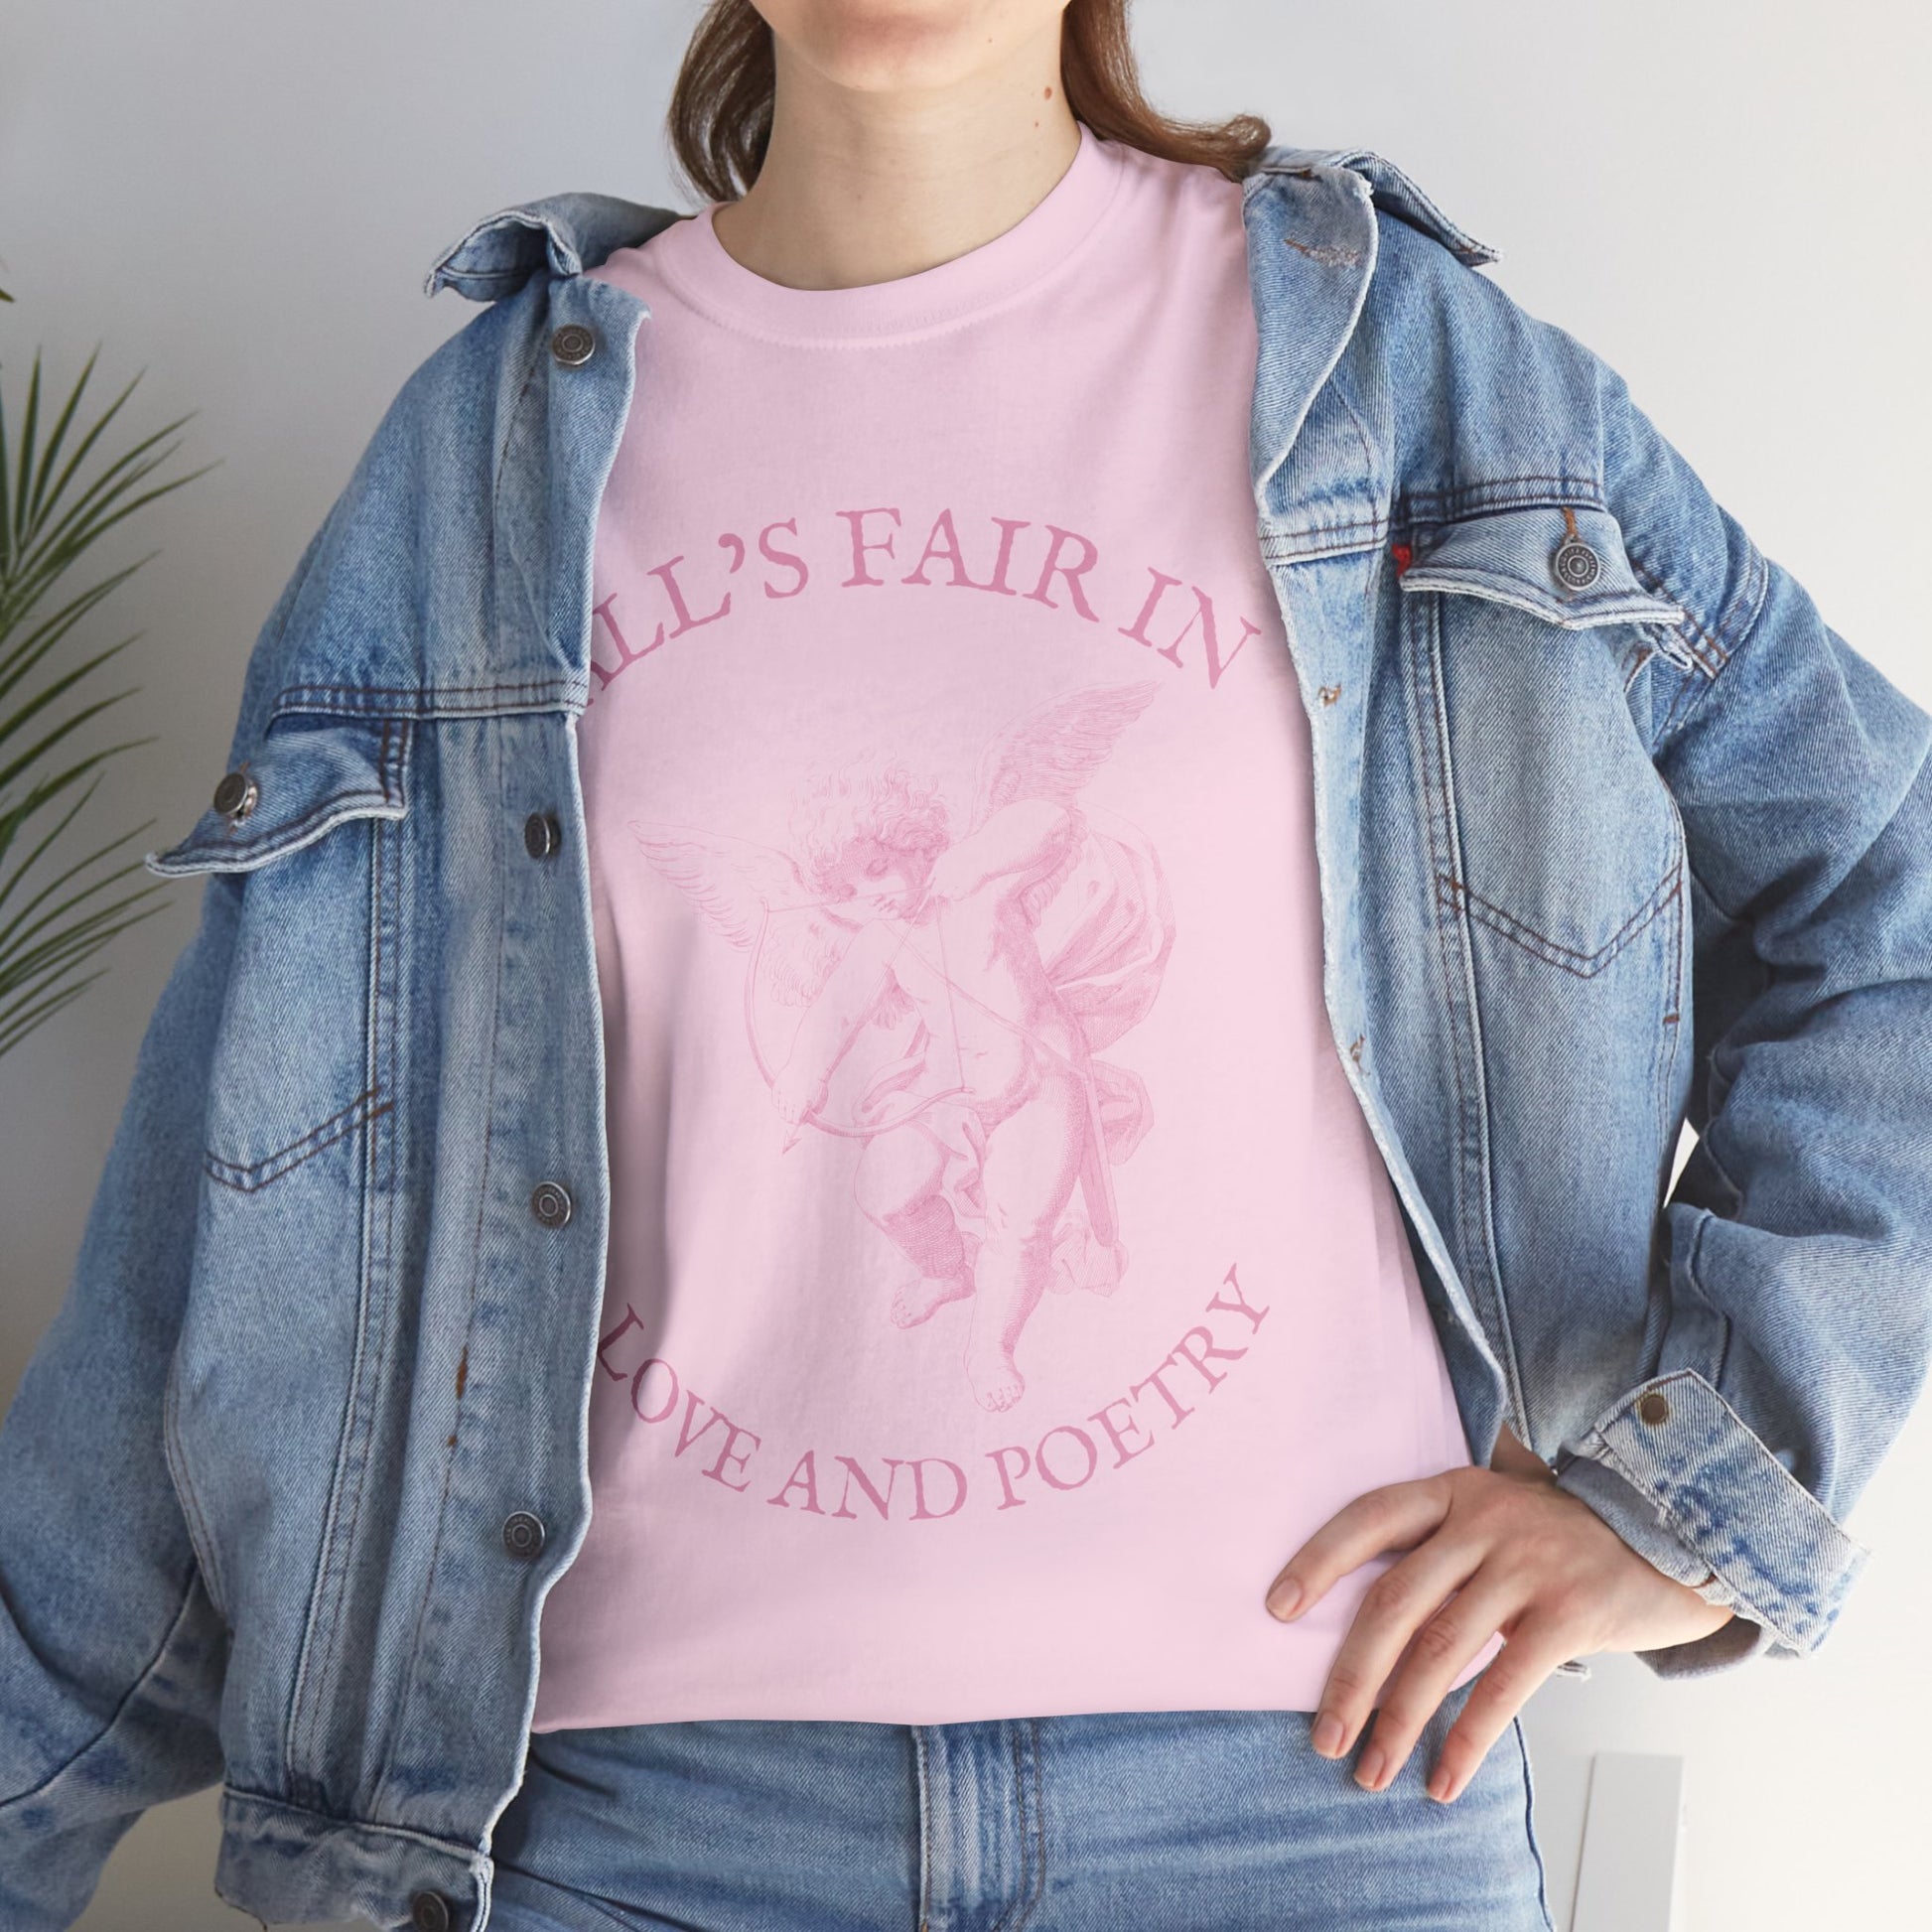 All's Fair in Love and Poetry T-Shirt Light Pink